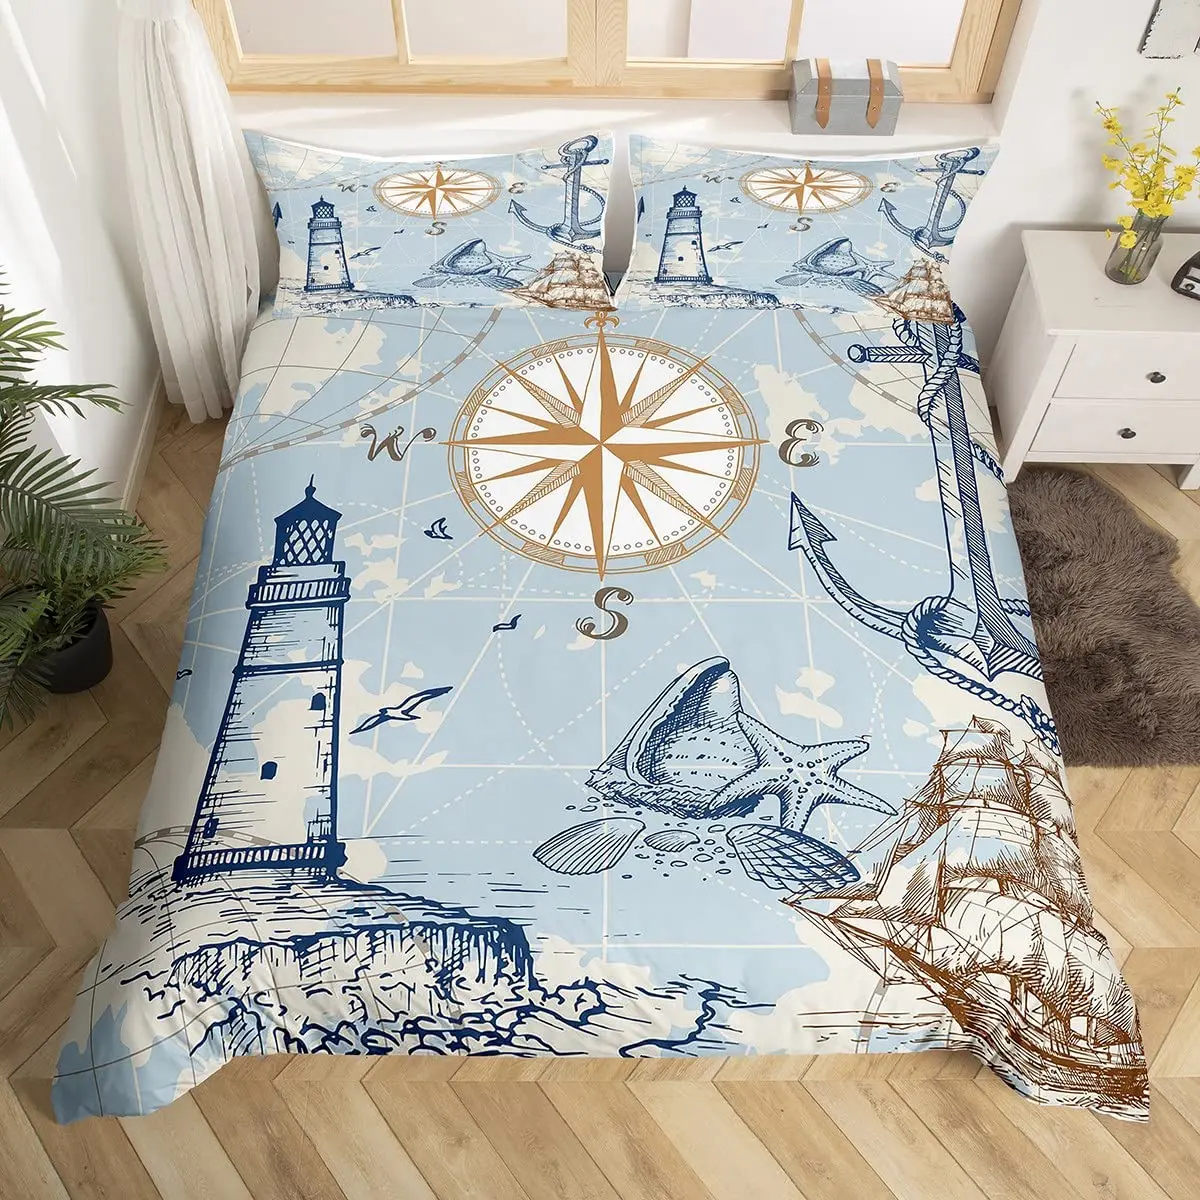 

Nautical Anchor Duvet Cover Set Vintage Sail Boat Lighthouse Bedding Set Conch Starfish Seashell Ocean Wave Comforter Cover King